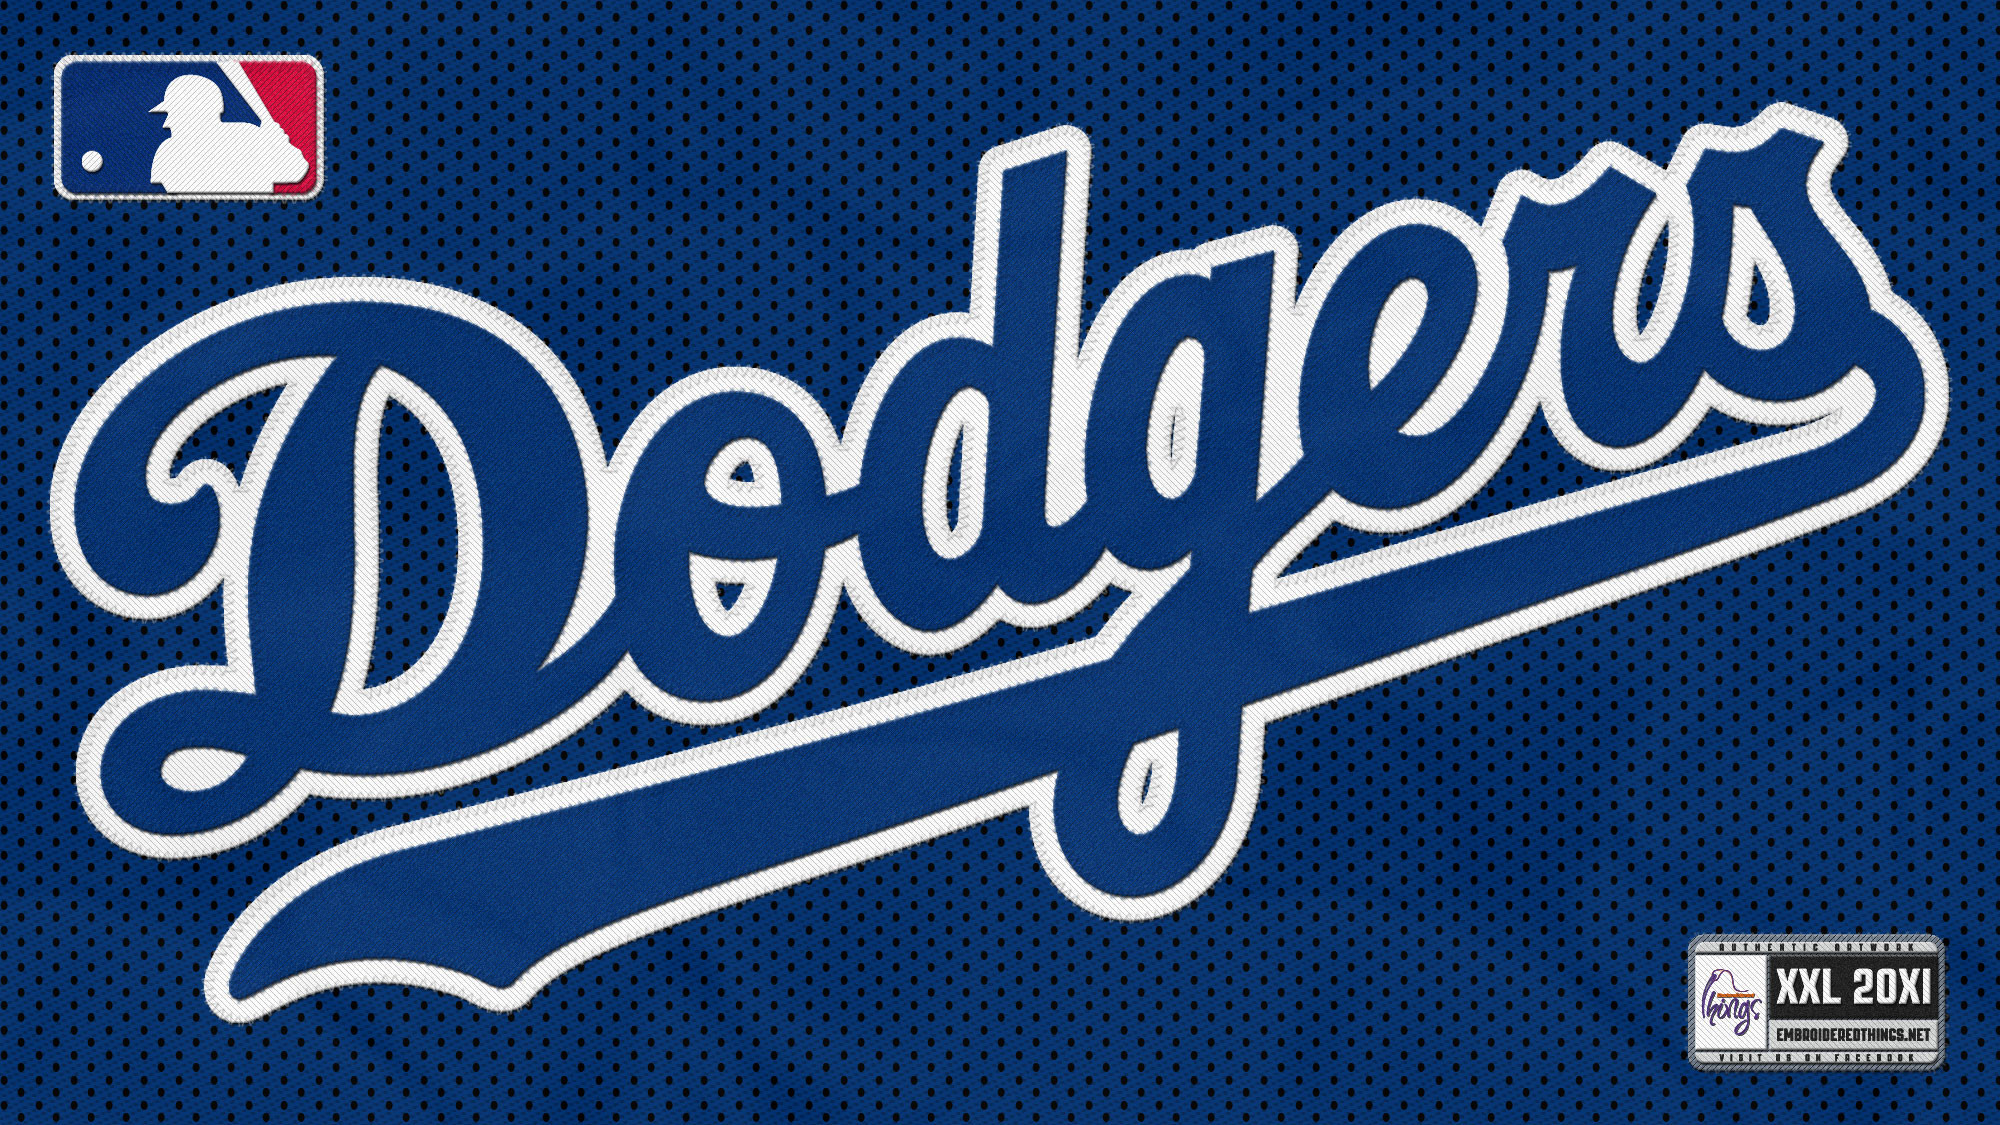 2000x1125 ... awesome los angeles dodgers wallpaper world s greatest art site ...